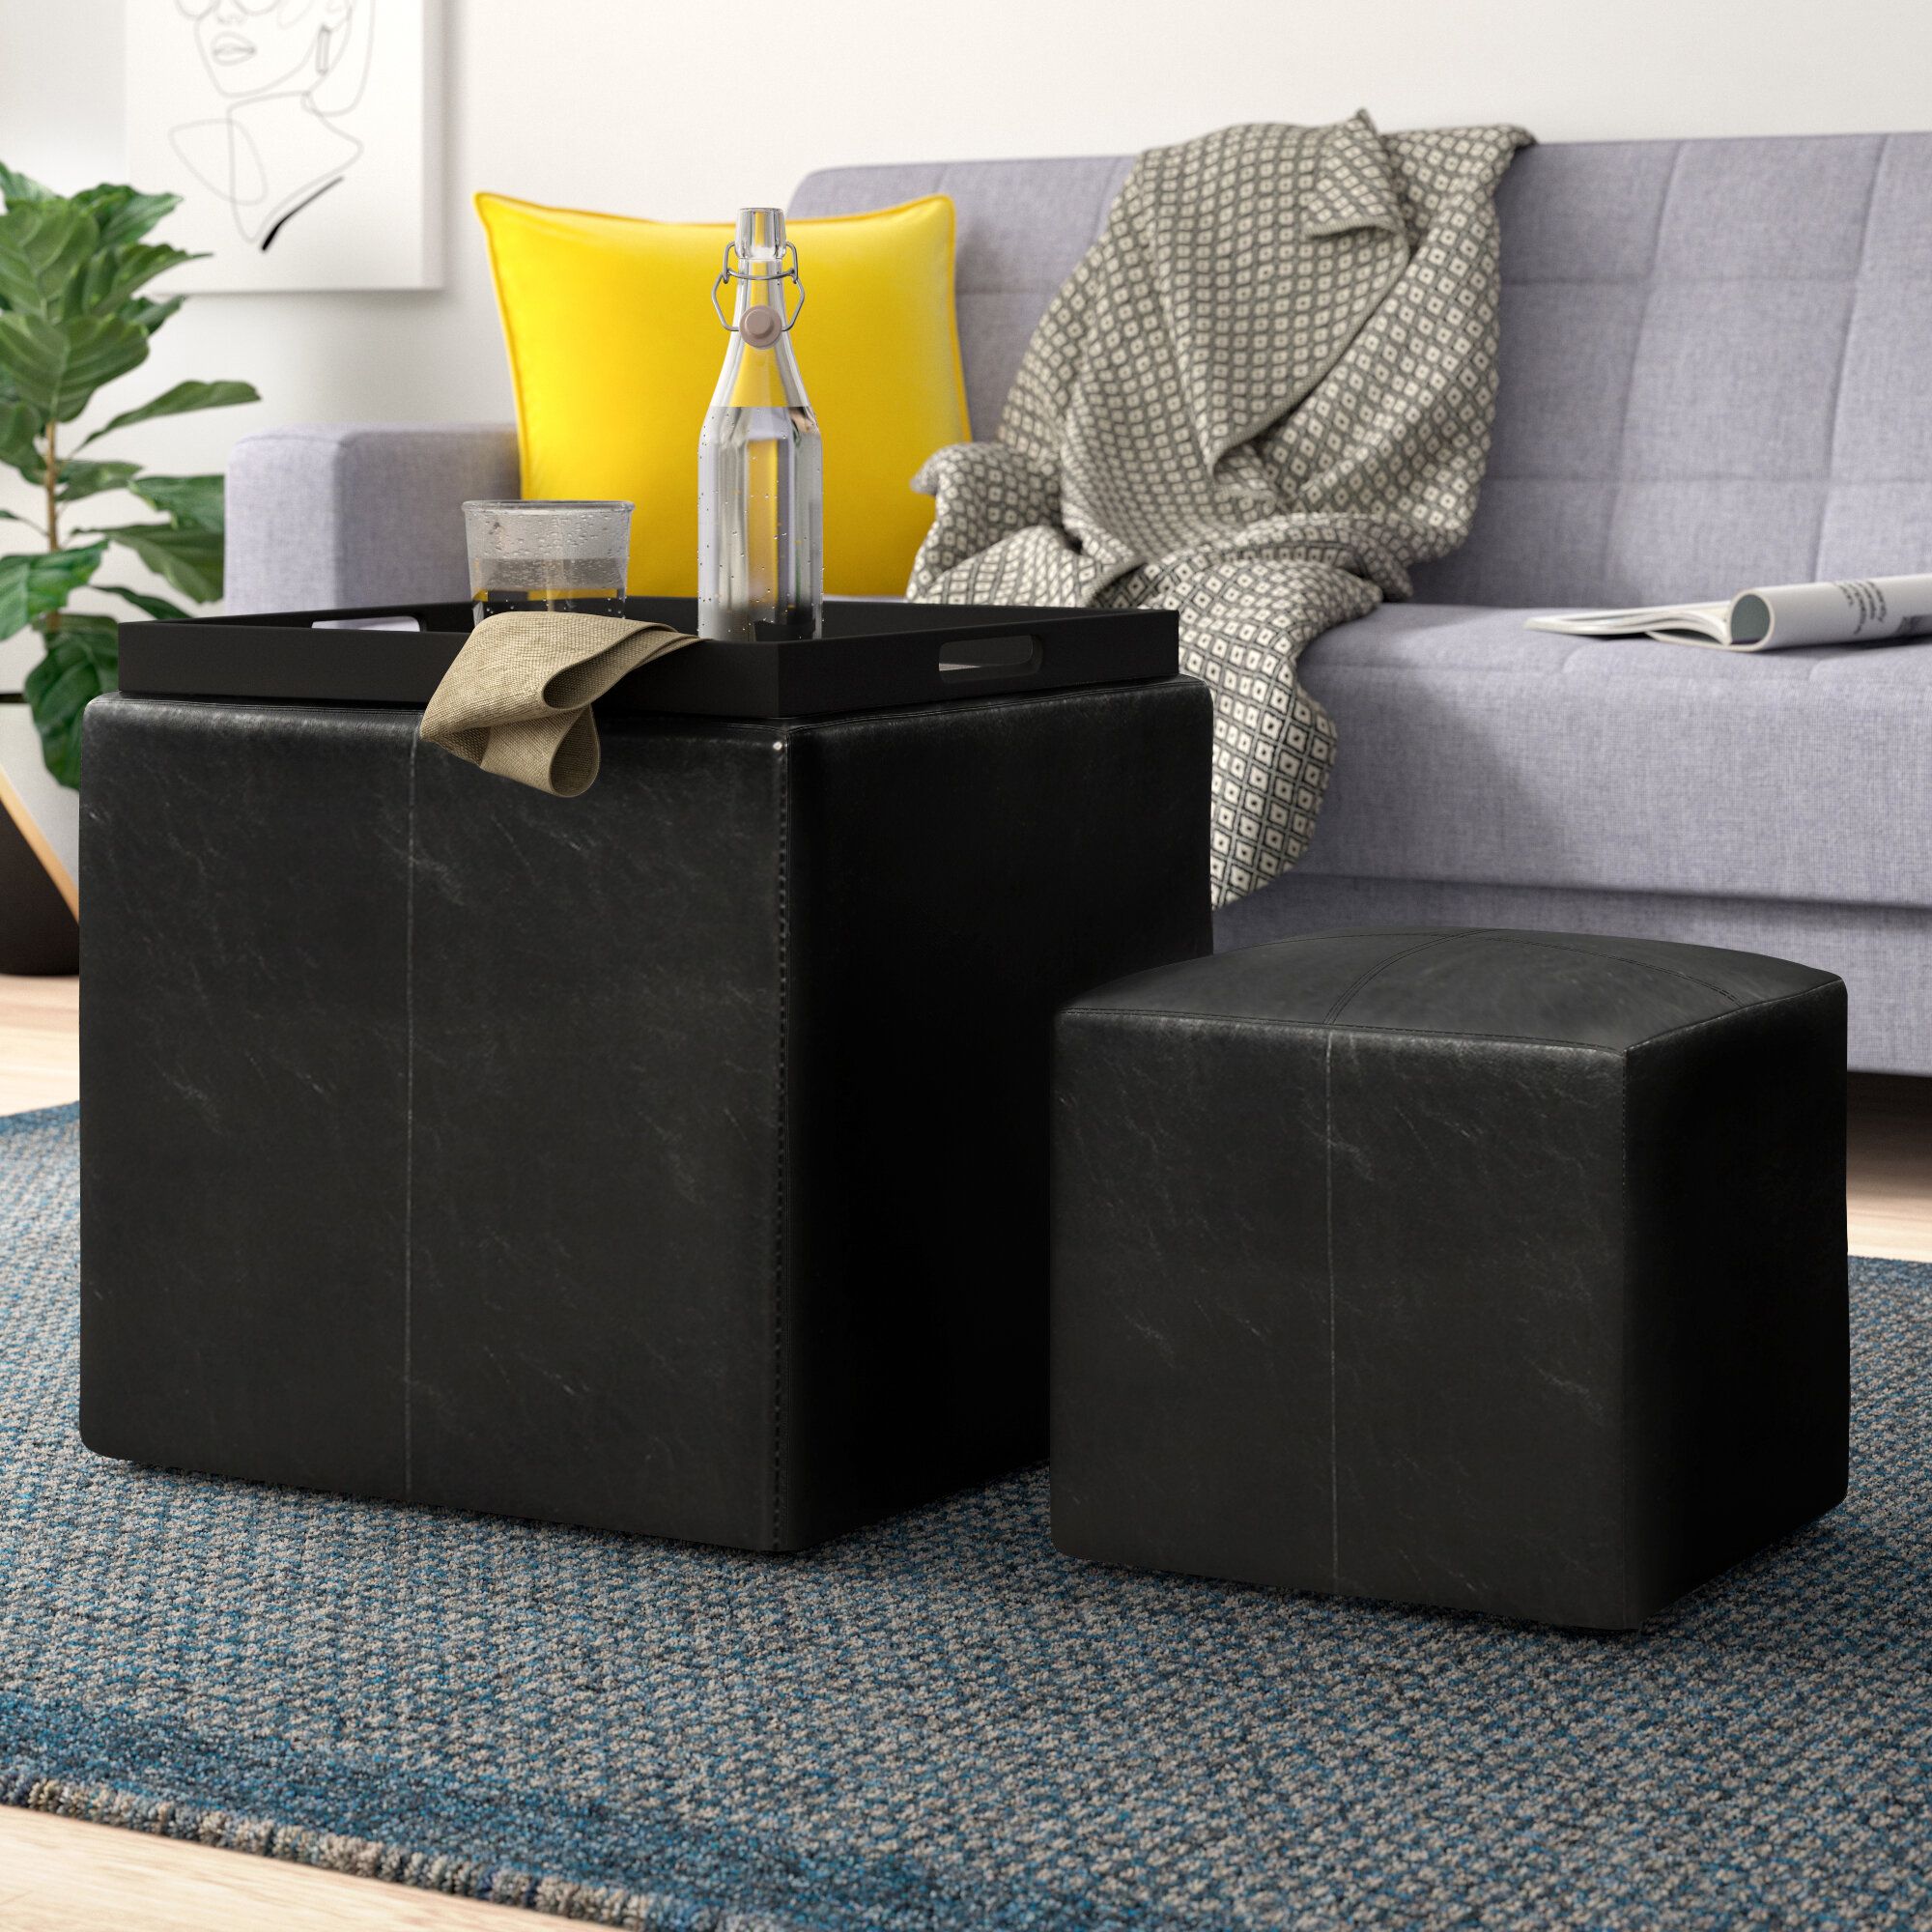 Zipcode Design™ Marla Square Ottoman With Stool And Reversible Tray &  Reviews | Wayfair Within Storage Ottomans With Reversible Trays (View 4 of 15)